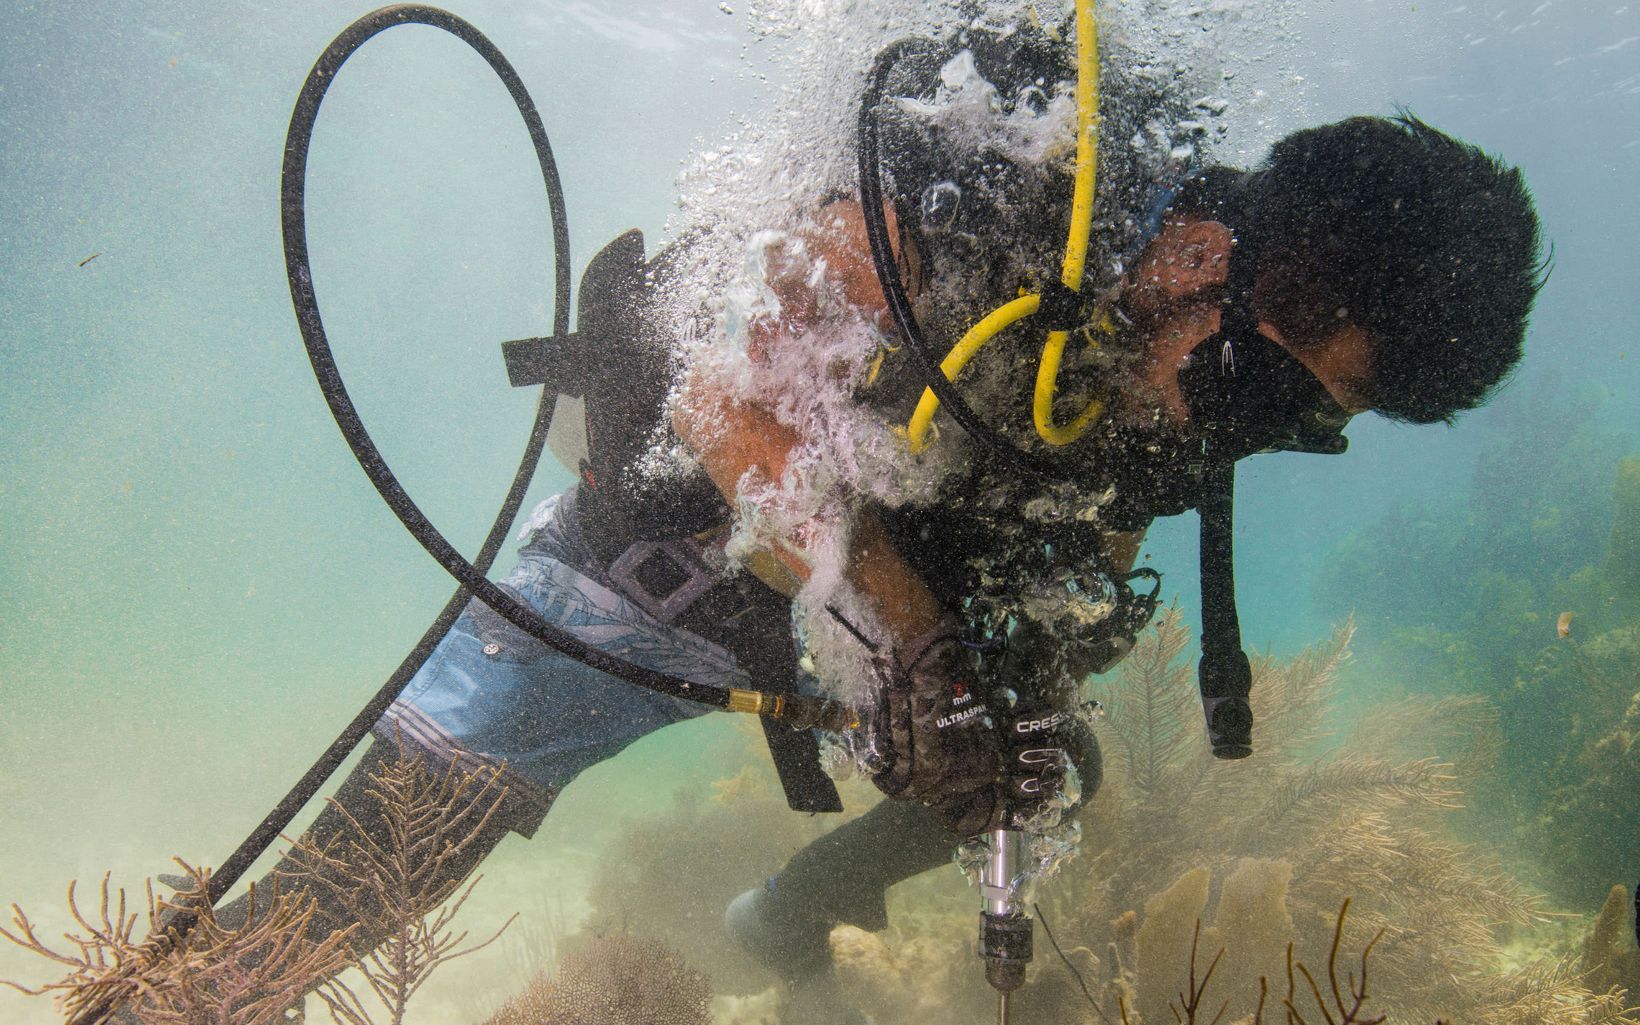 A diver practices using a drill underwater to attach supports that will be used to reattach a piece of broken coral.